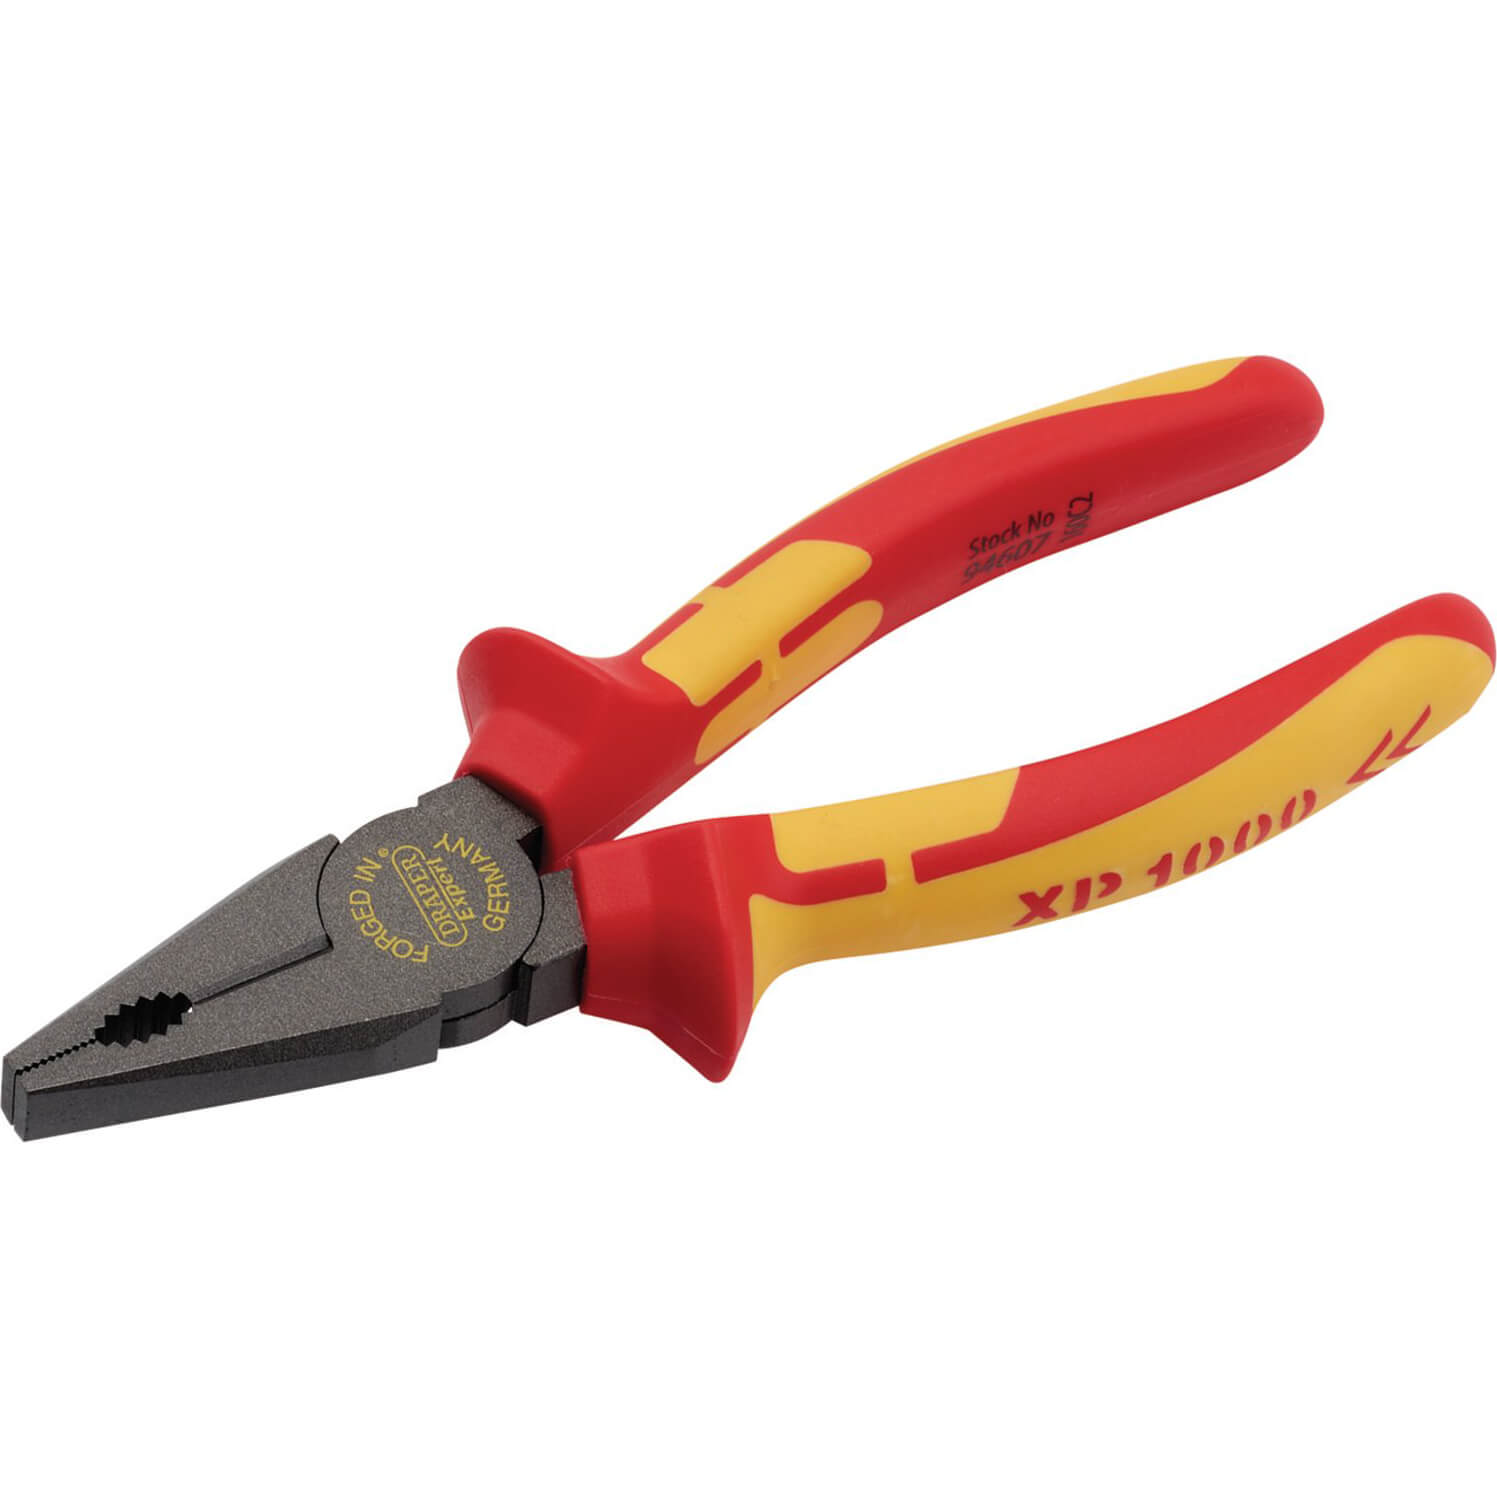 Photo of Draper Xp1000 Vde Insulated Combination Pliers 160mm